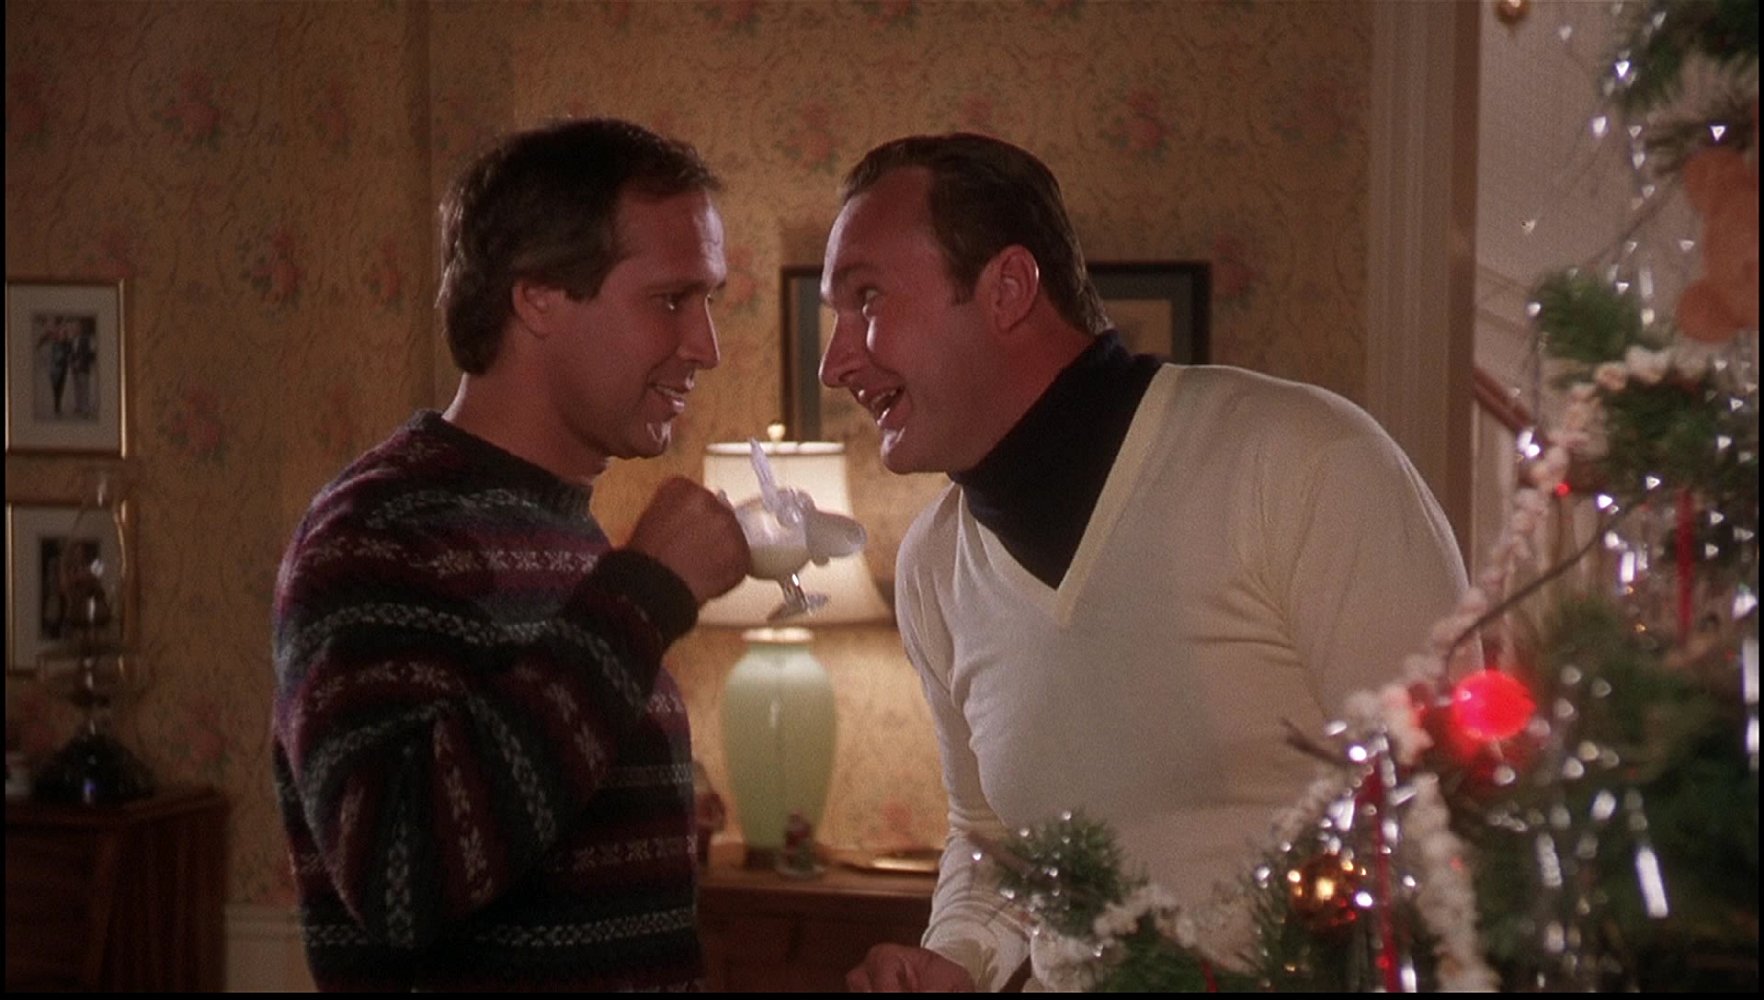 National Lampoon's Christmas Vacation (DVD), Warner Home Video, Comedy - image 5 of 7